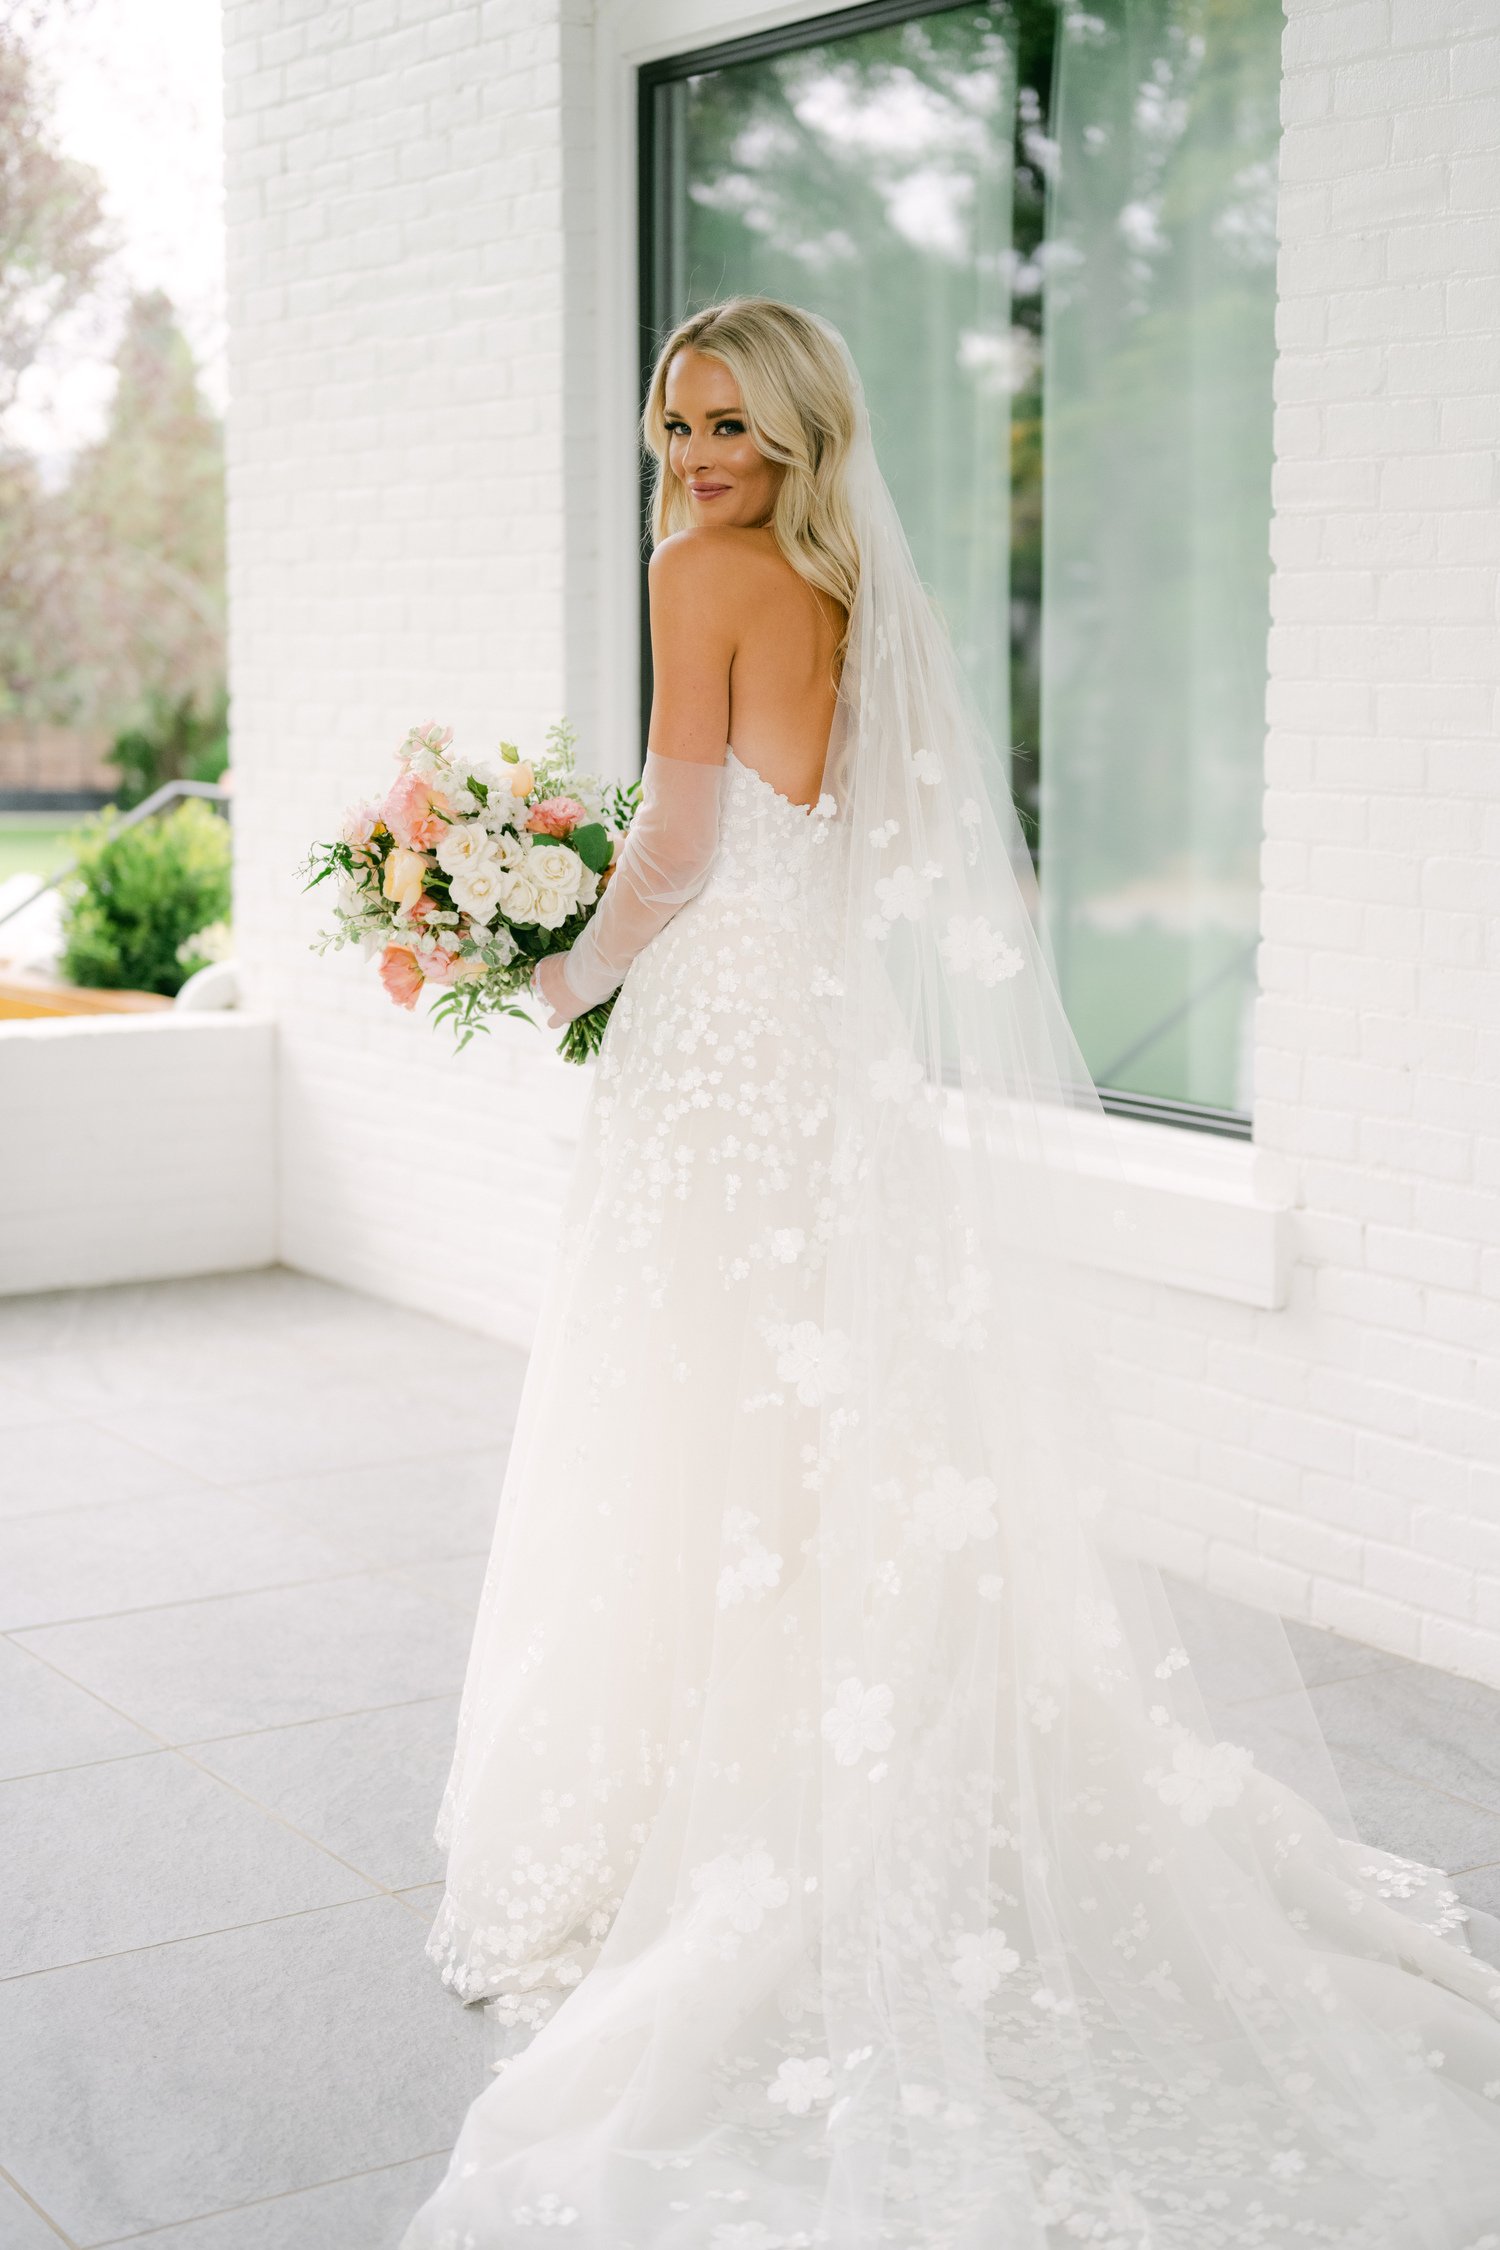 Elm Estate Wedding photos, photo of the bride in her ethereal wedding dress with delicate flower details